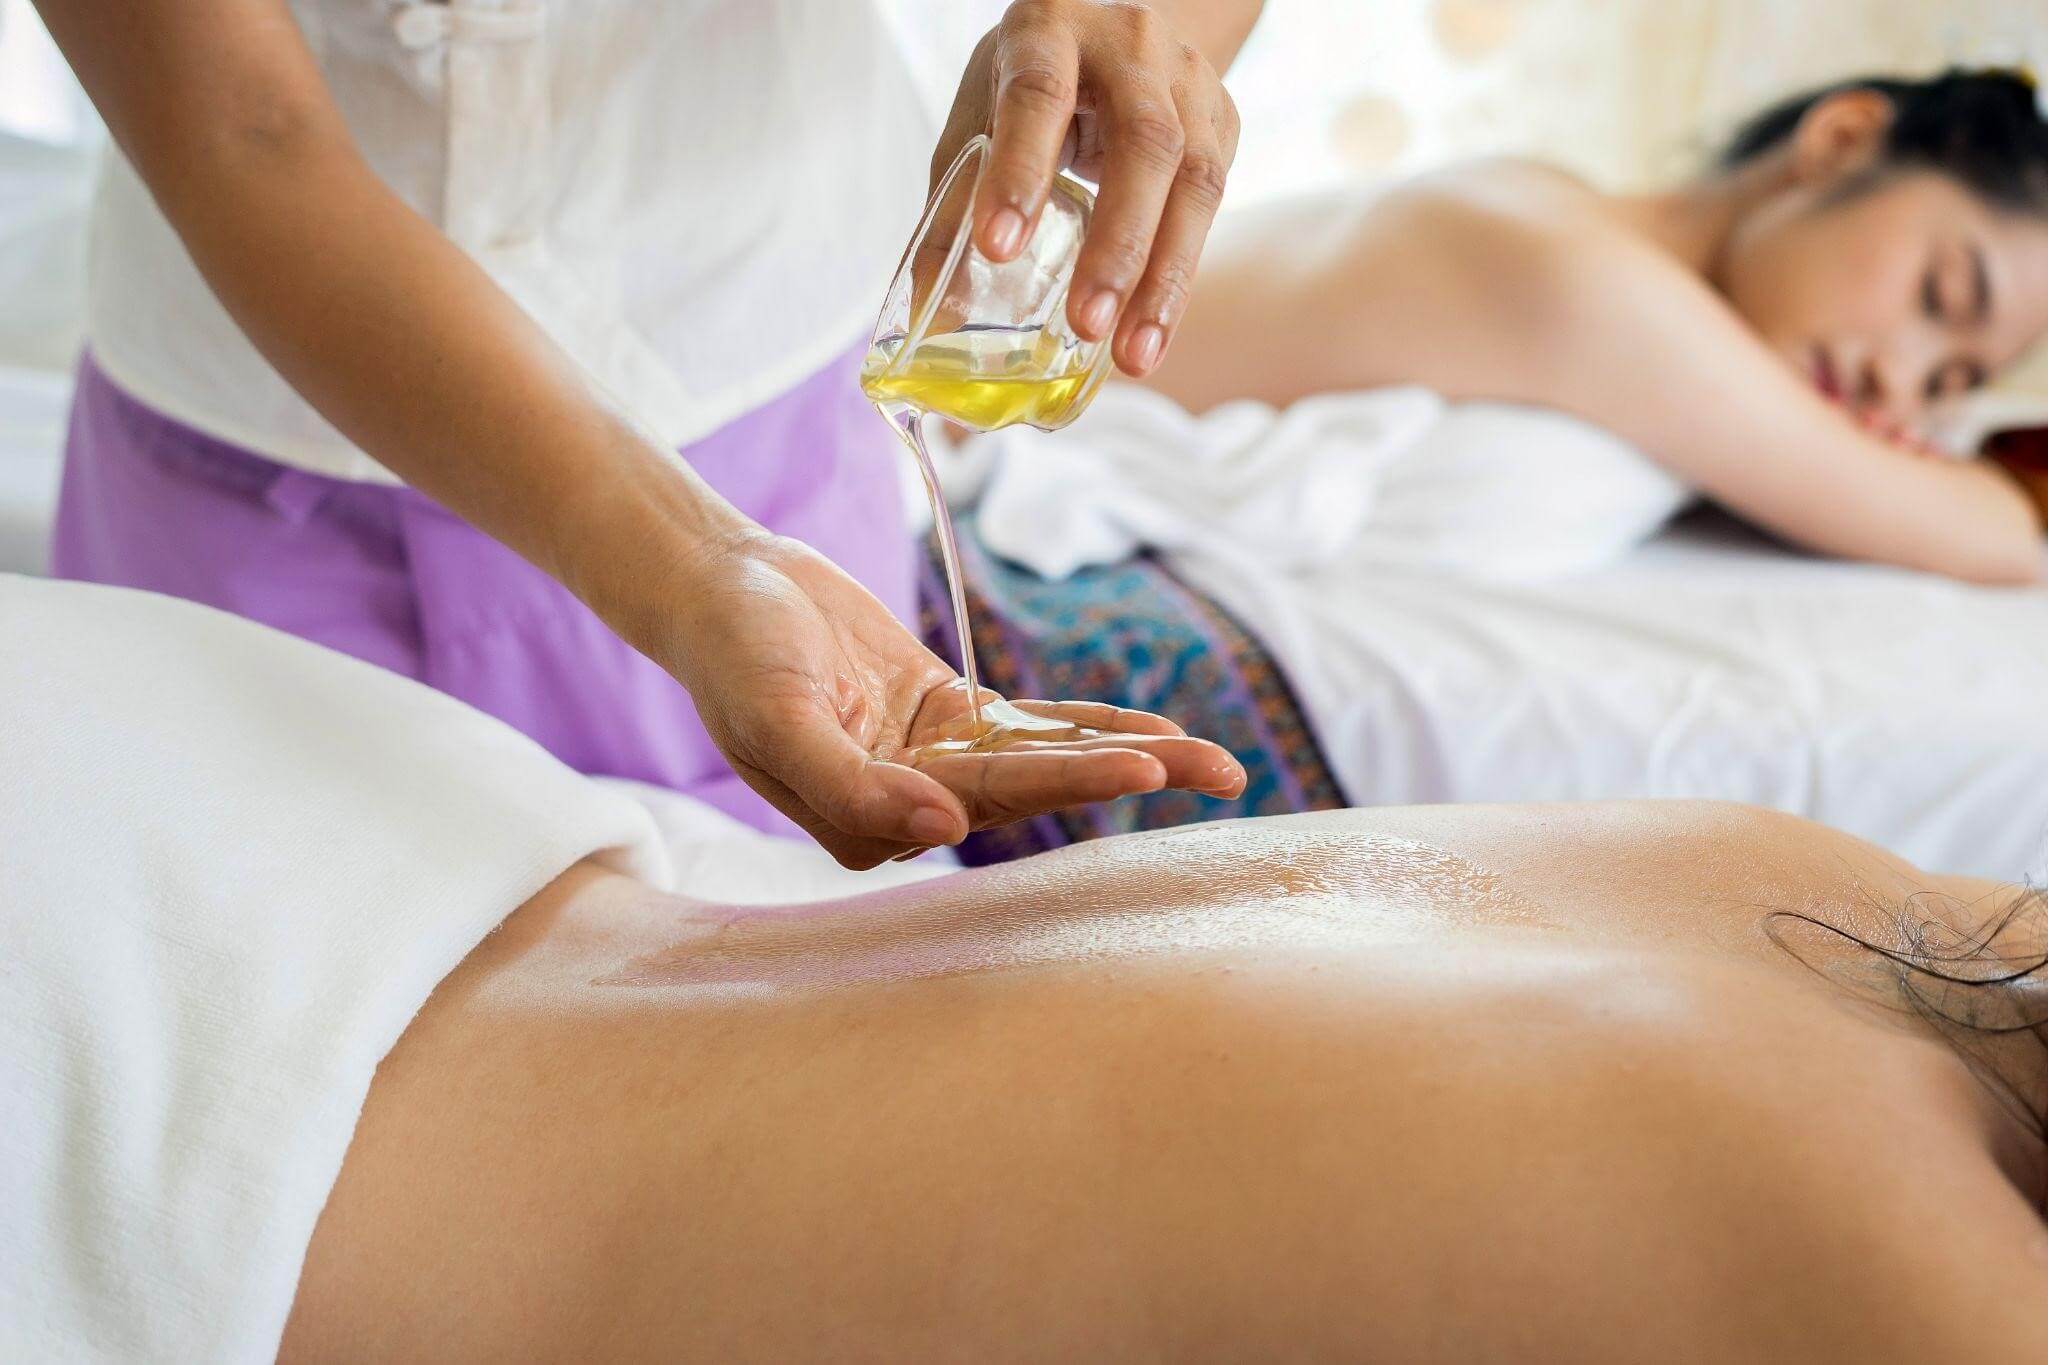 masseur puting na essential oil to a client massage therapy in venice